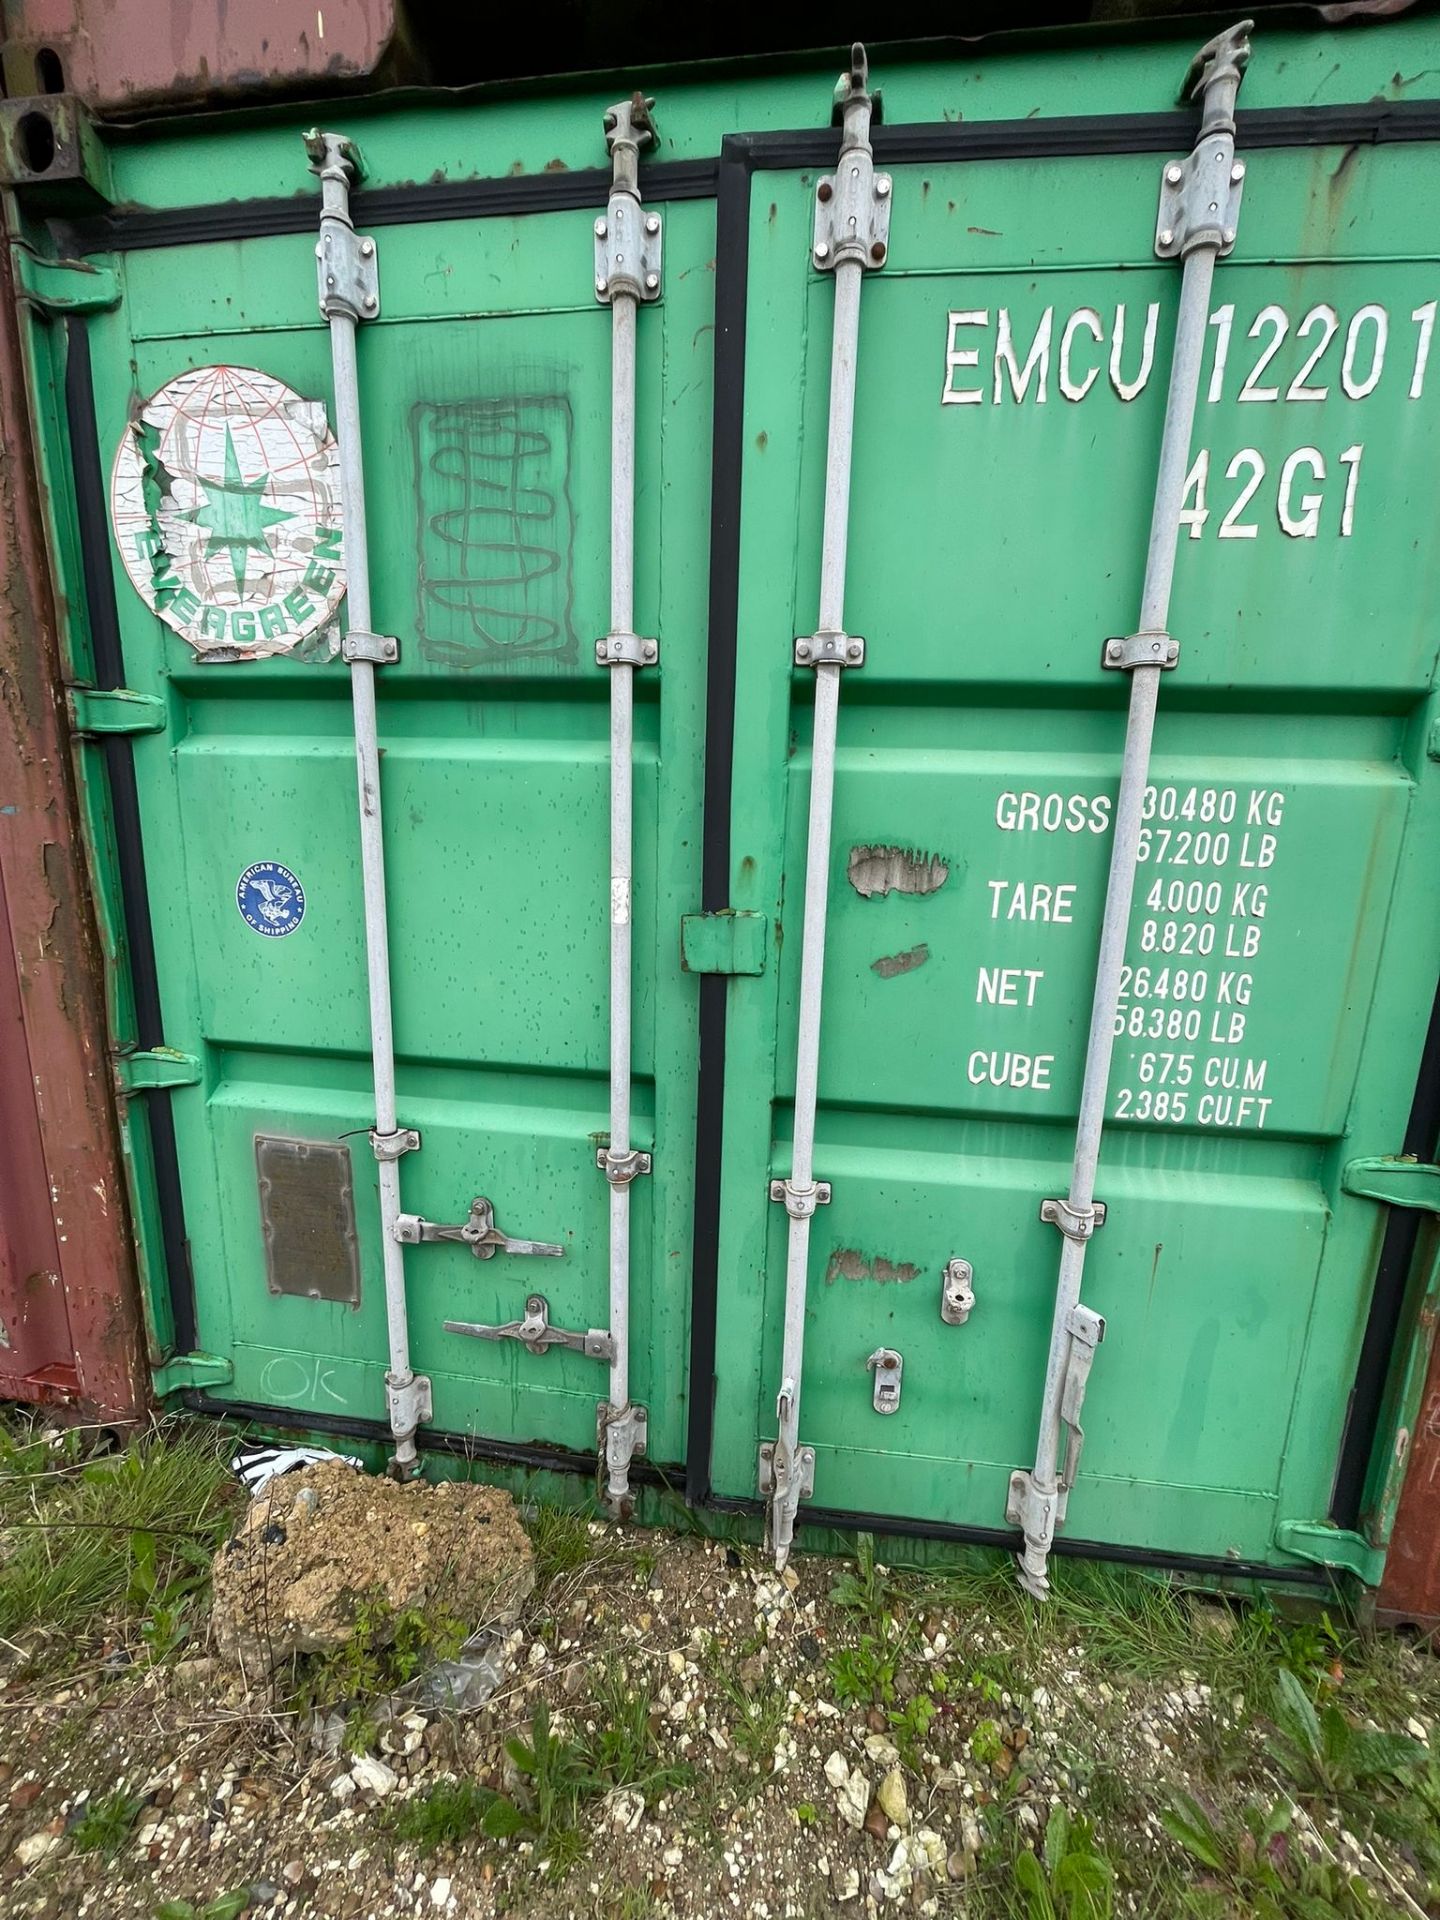 Shipping Container - ref EMCU1220178 - NO RESERVE (40’ GP - Standard)